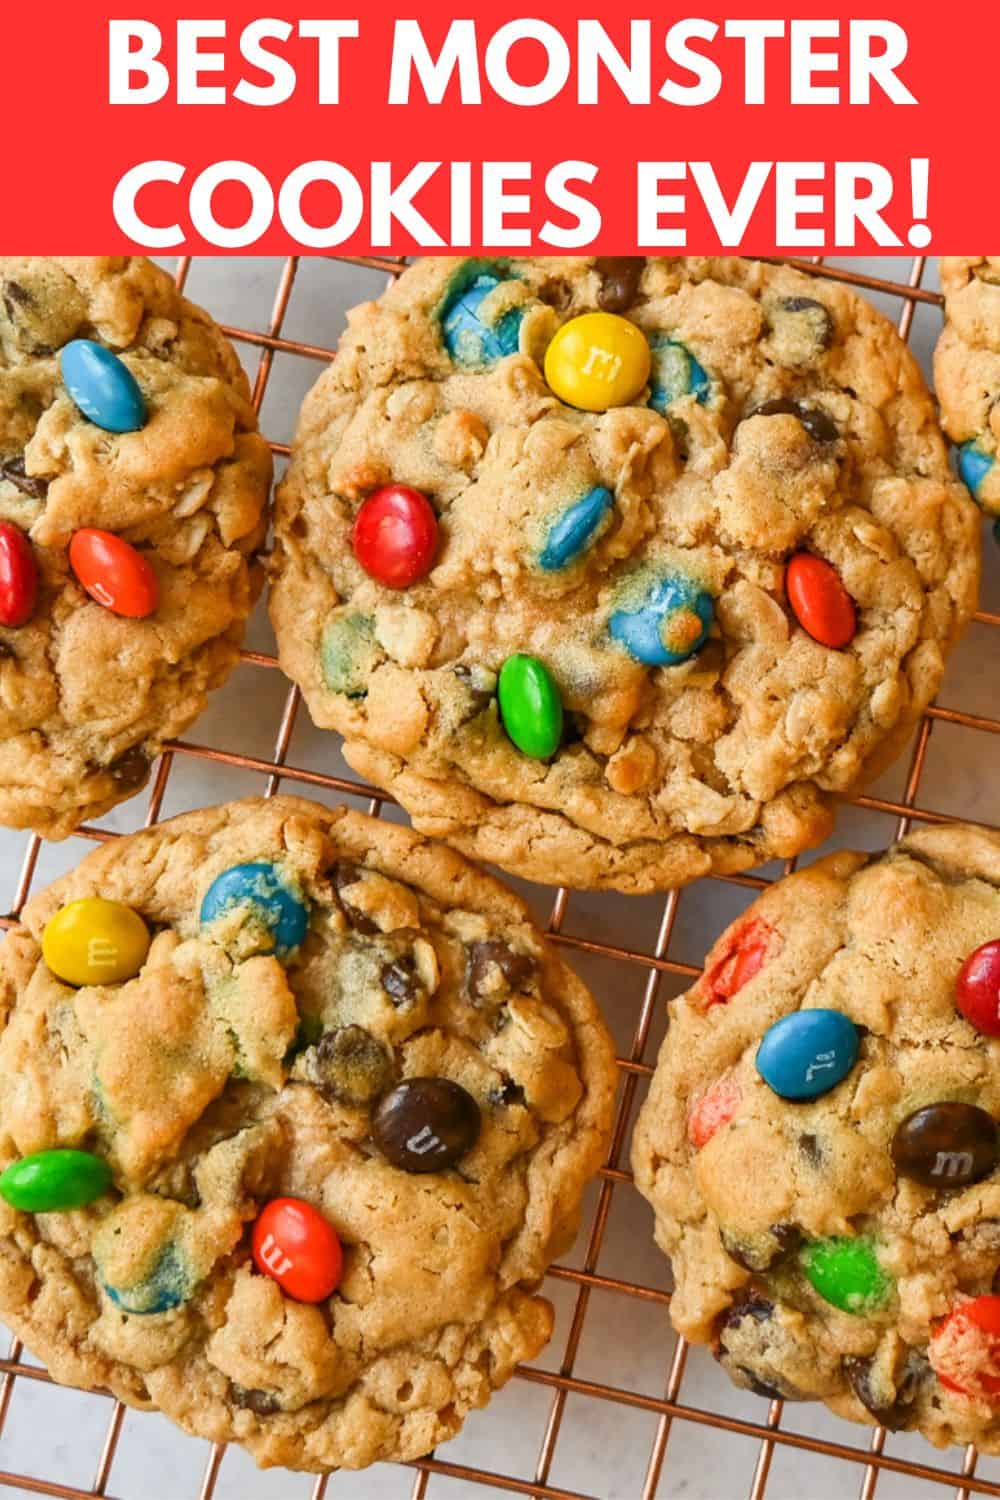 Best Monster Cookies. The Best Peanut Butter Monster Cookies are made with creamy peanut butter, hearty oats, chocolate chips, and M&M's. These soft and chewy Monster cookies are loved by everyone...especially peanut butter enthusiasts!